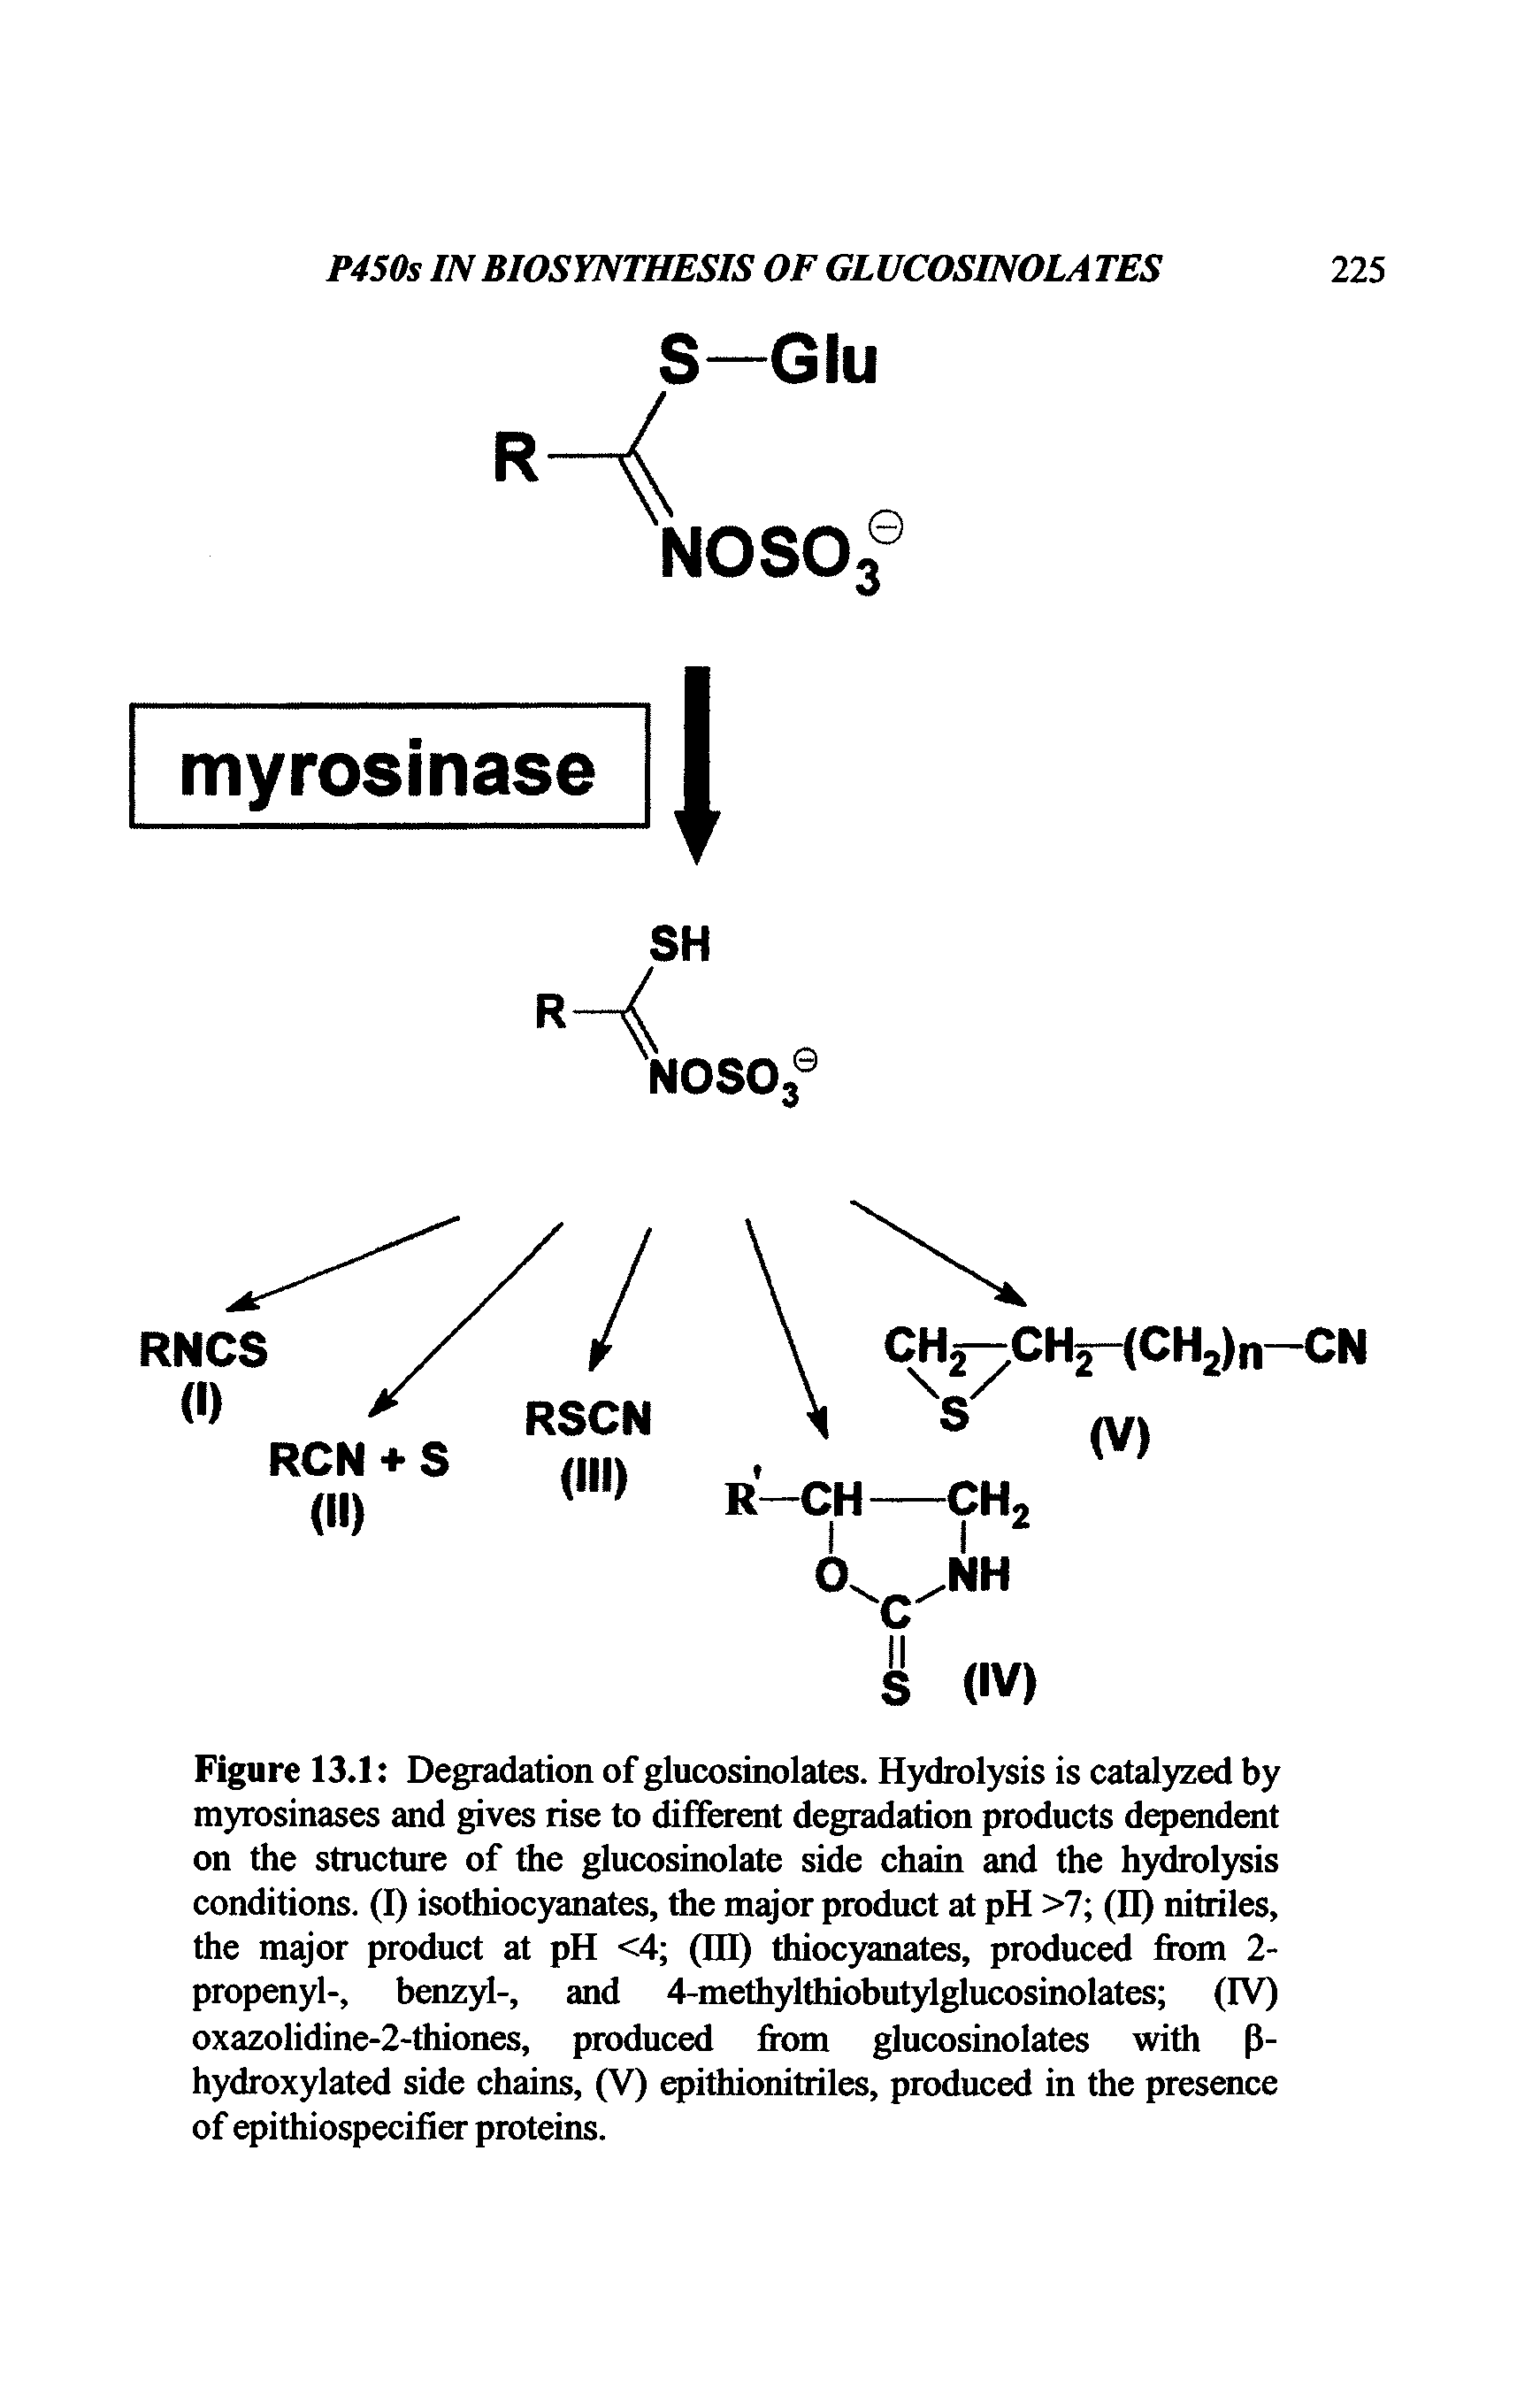 Figure 13.1 Degradation of glucosinolates. Hydrolysis is catalyzed by myrosinases and gives rise to different degradation products dependent on the structure of the glucosinolate side chain and the hydrolysis conditions. (I) isothiocyanates, the major product at pH >7 (II) nitriles, the major product at pH <4 (ID) thiocyanates, produced from 2-propenyl-, benzyl-, and 4-methylthiobutylglucosinolates (IV) oxazolidine-2-thiones, produced from glucosinolates with P-hydroxylated side chains, (V) epithionitriles, produced in the presence of epithiospecifier proteins.